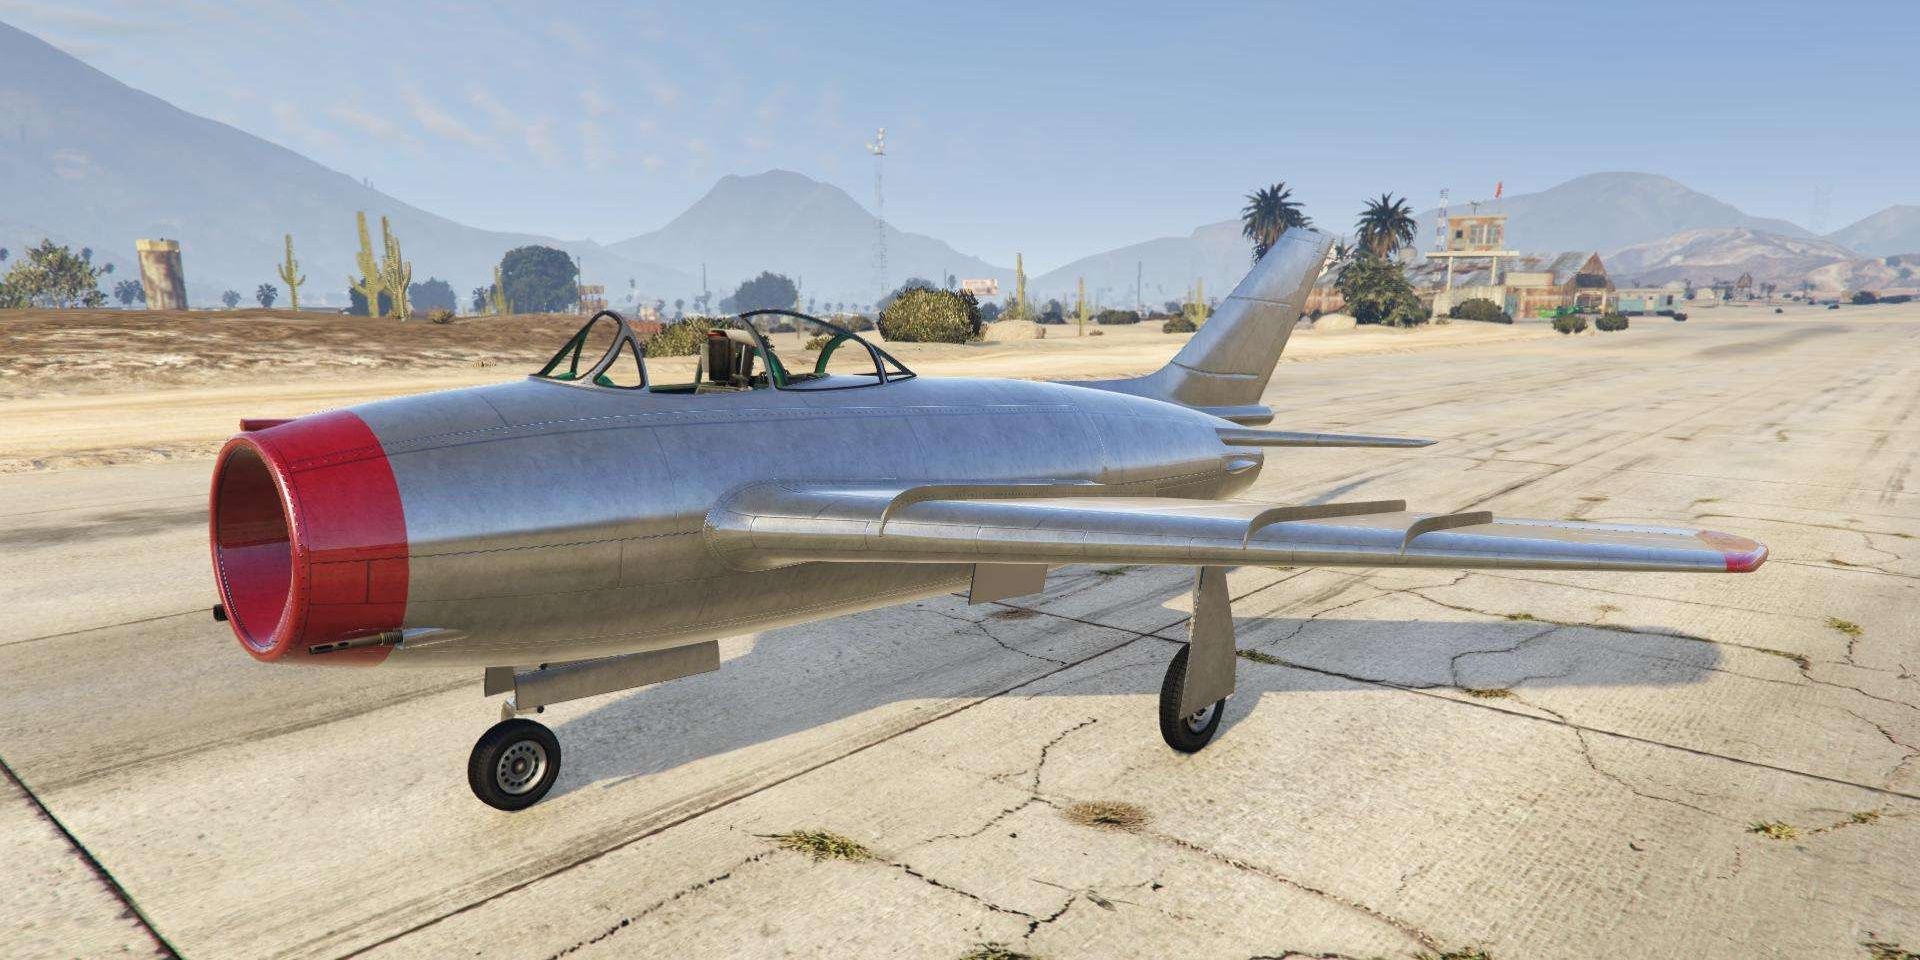 Most Expensive Items You Can Purchase In Grand Theft Auto 5, Ranked V-65 Molotok